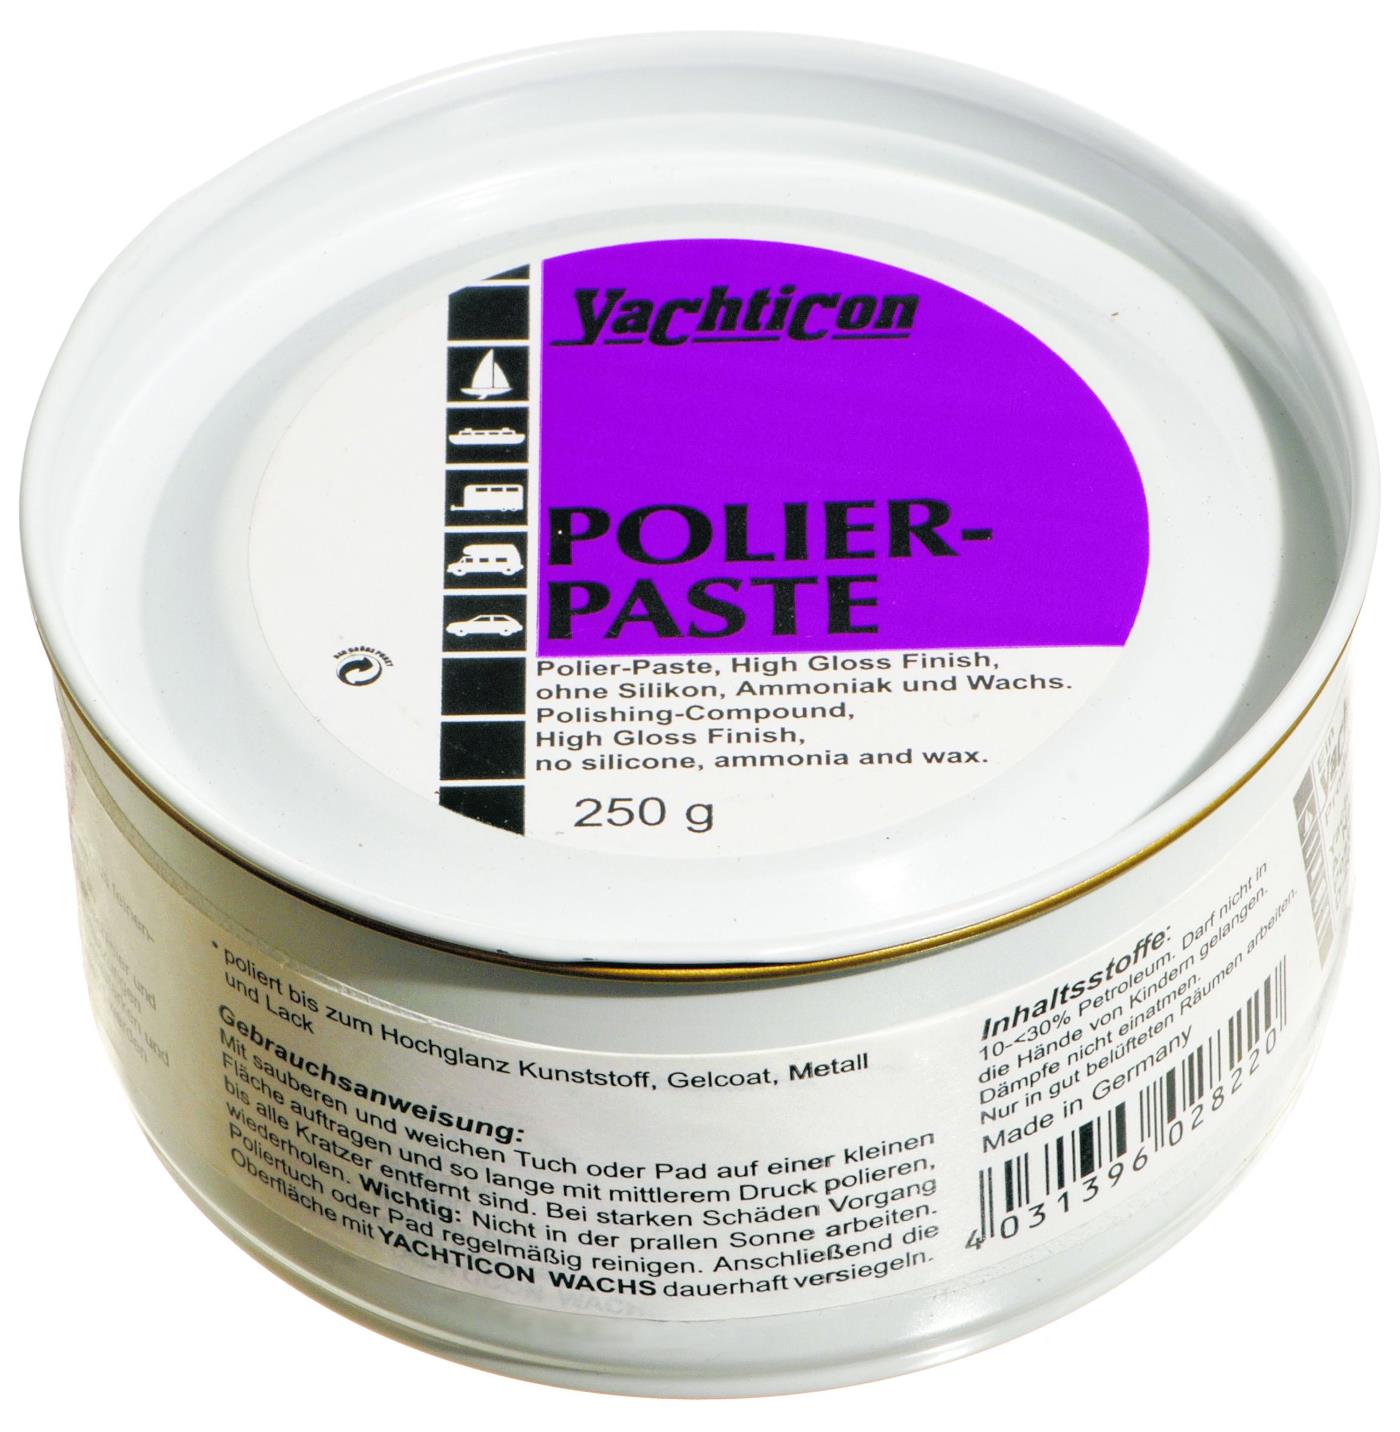 Yachticon Polierpaste high gloss finish M 150 / 250 g